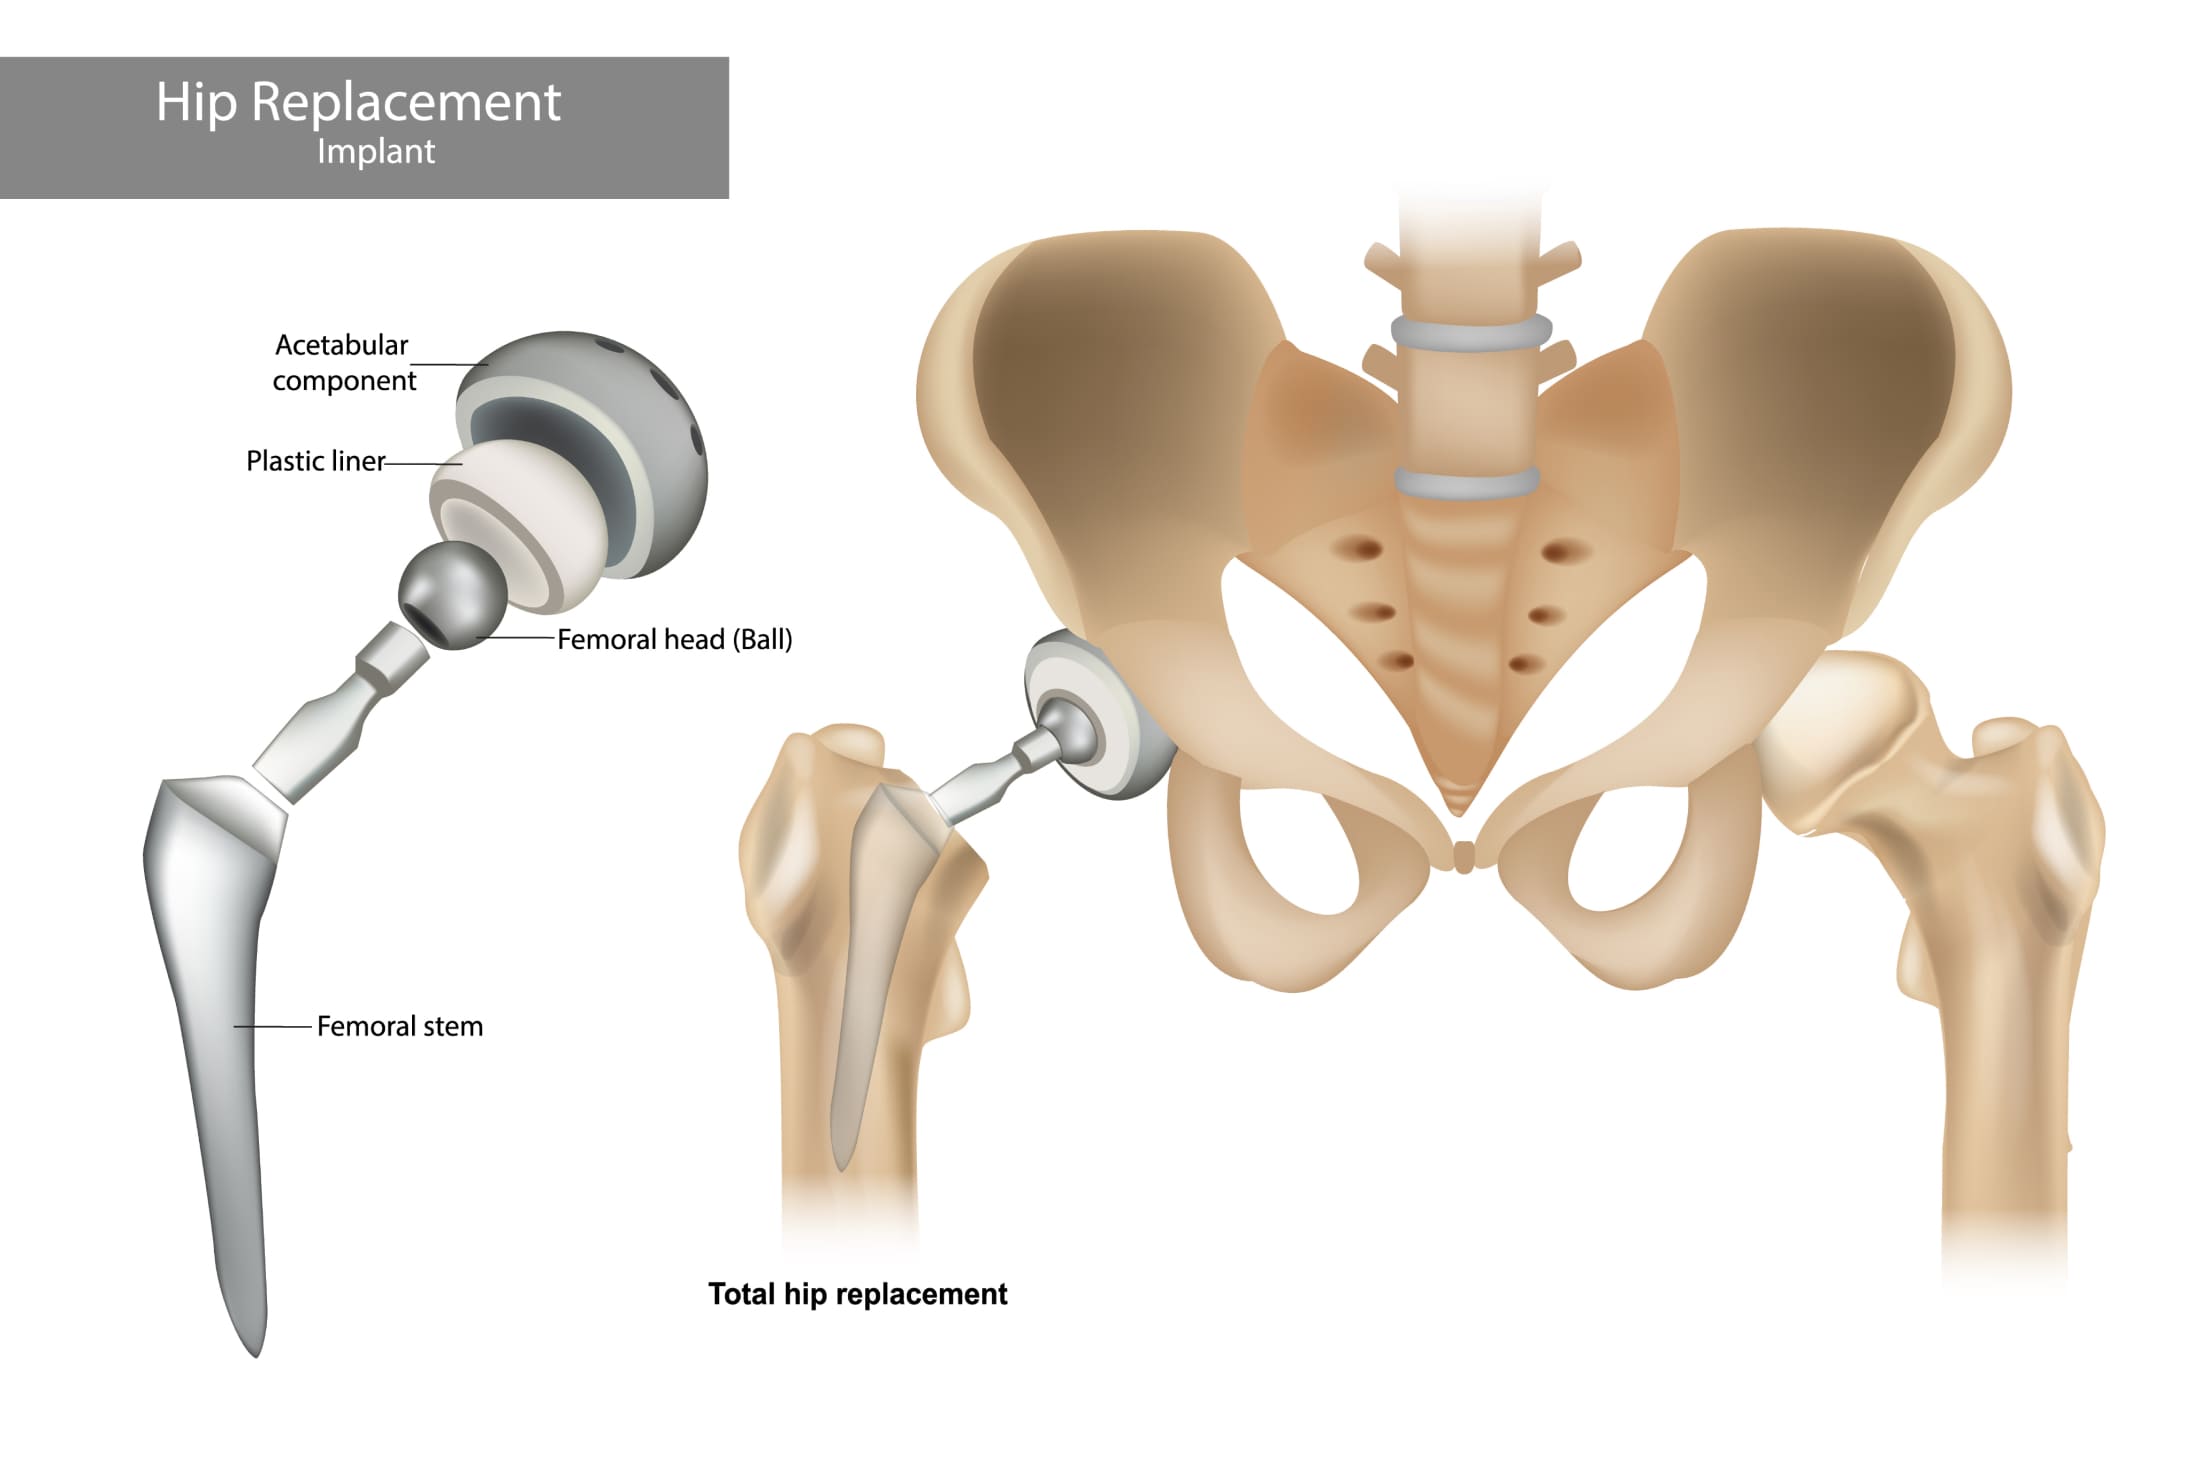 metal implant for hip replacement